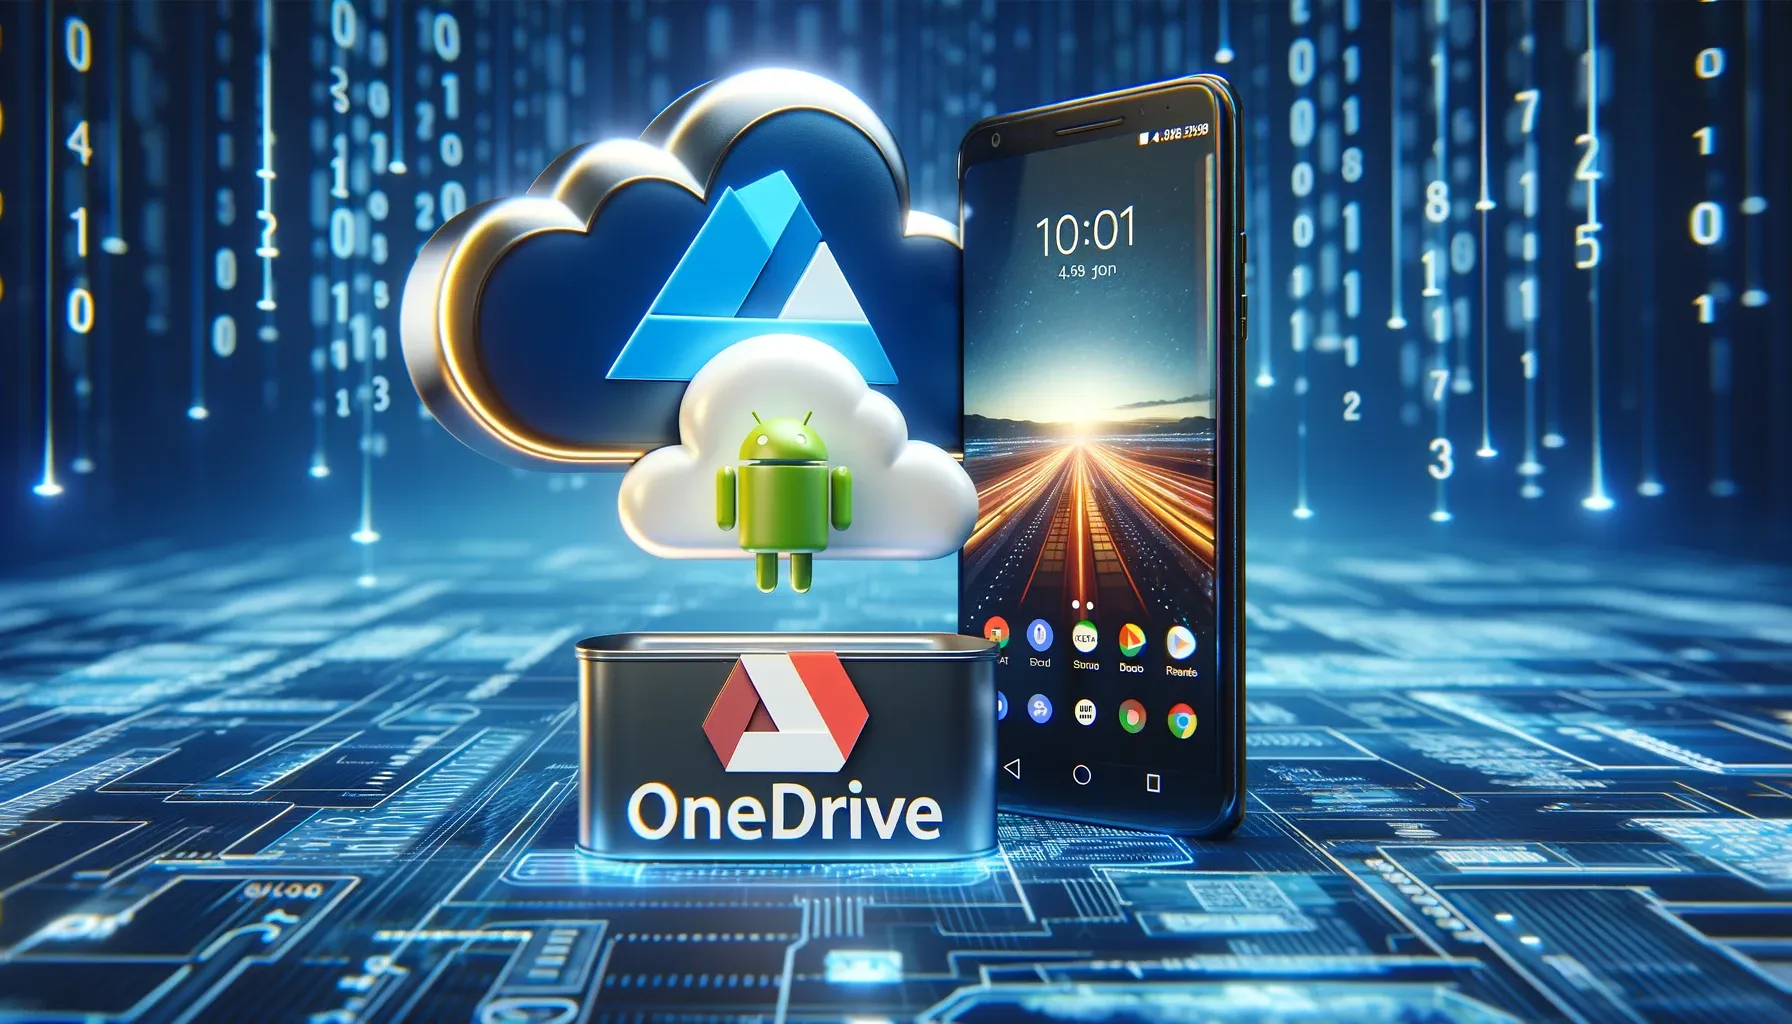 How to Automatically Backup Videos from Android to OneDrive?